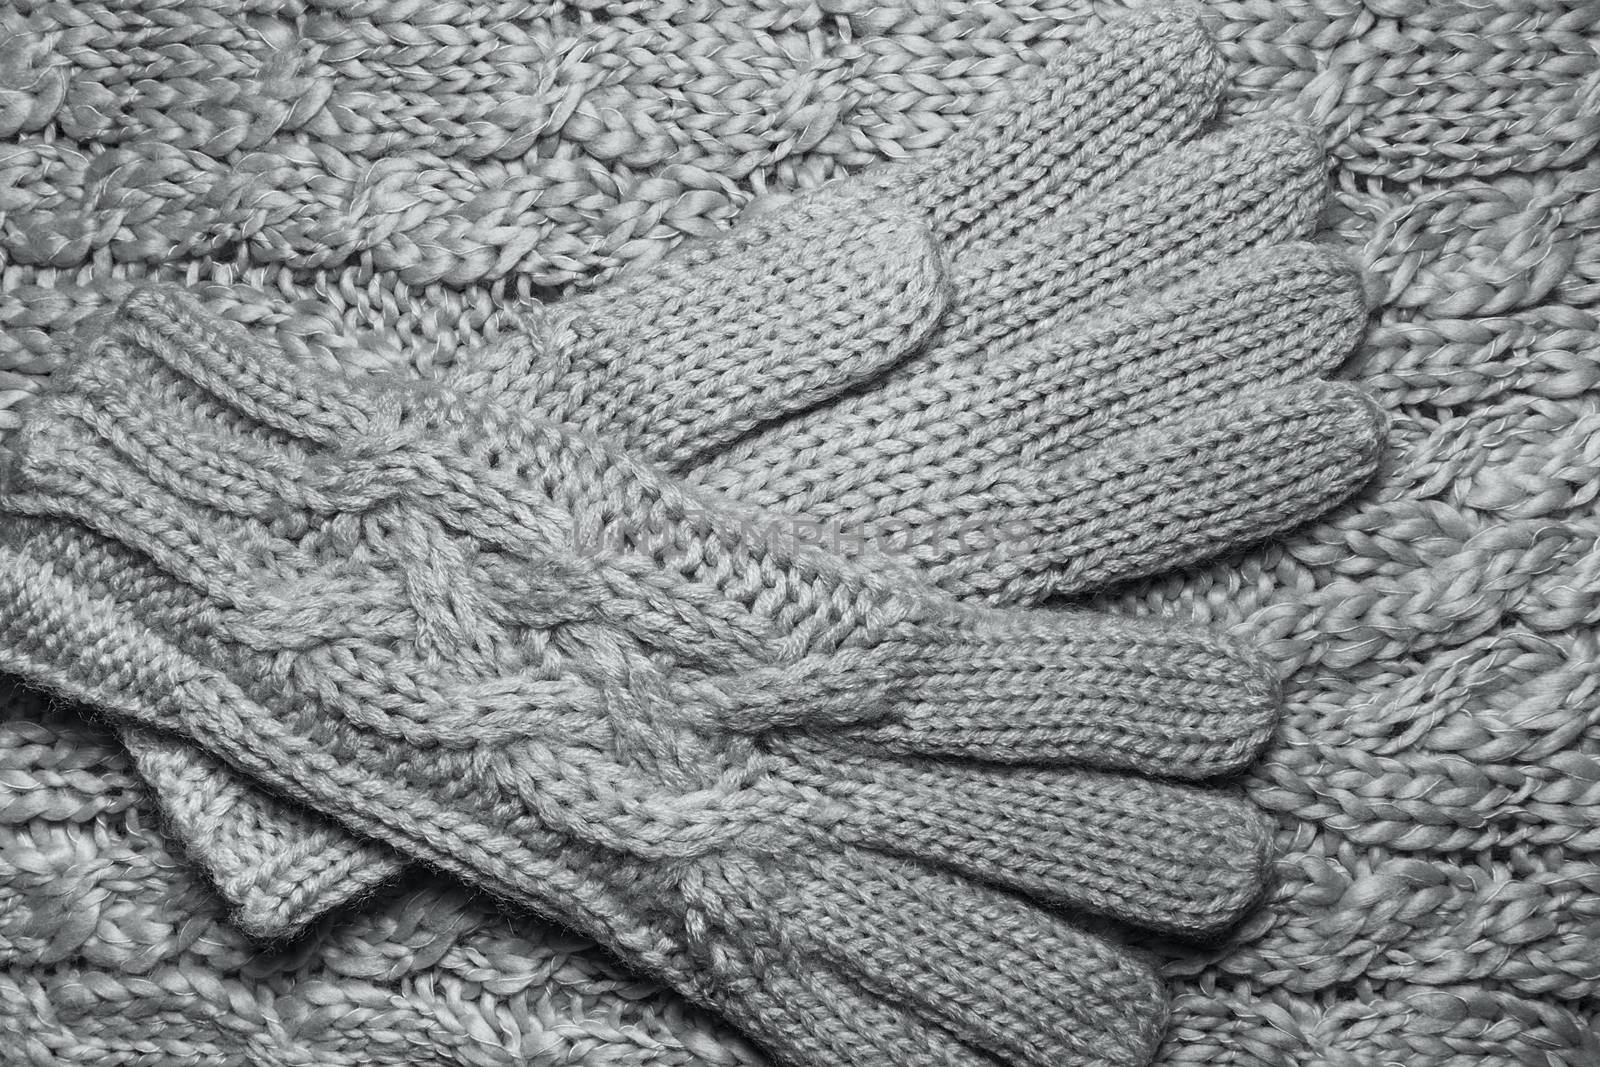 Wool sweater or scarf and gloves texture close up. Knitted jersey background with a relief pattern. Braids in machine knitting pattern. Wool hand-knitted or machine knitting pattern. Closeup Fabric Background